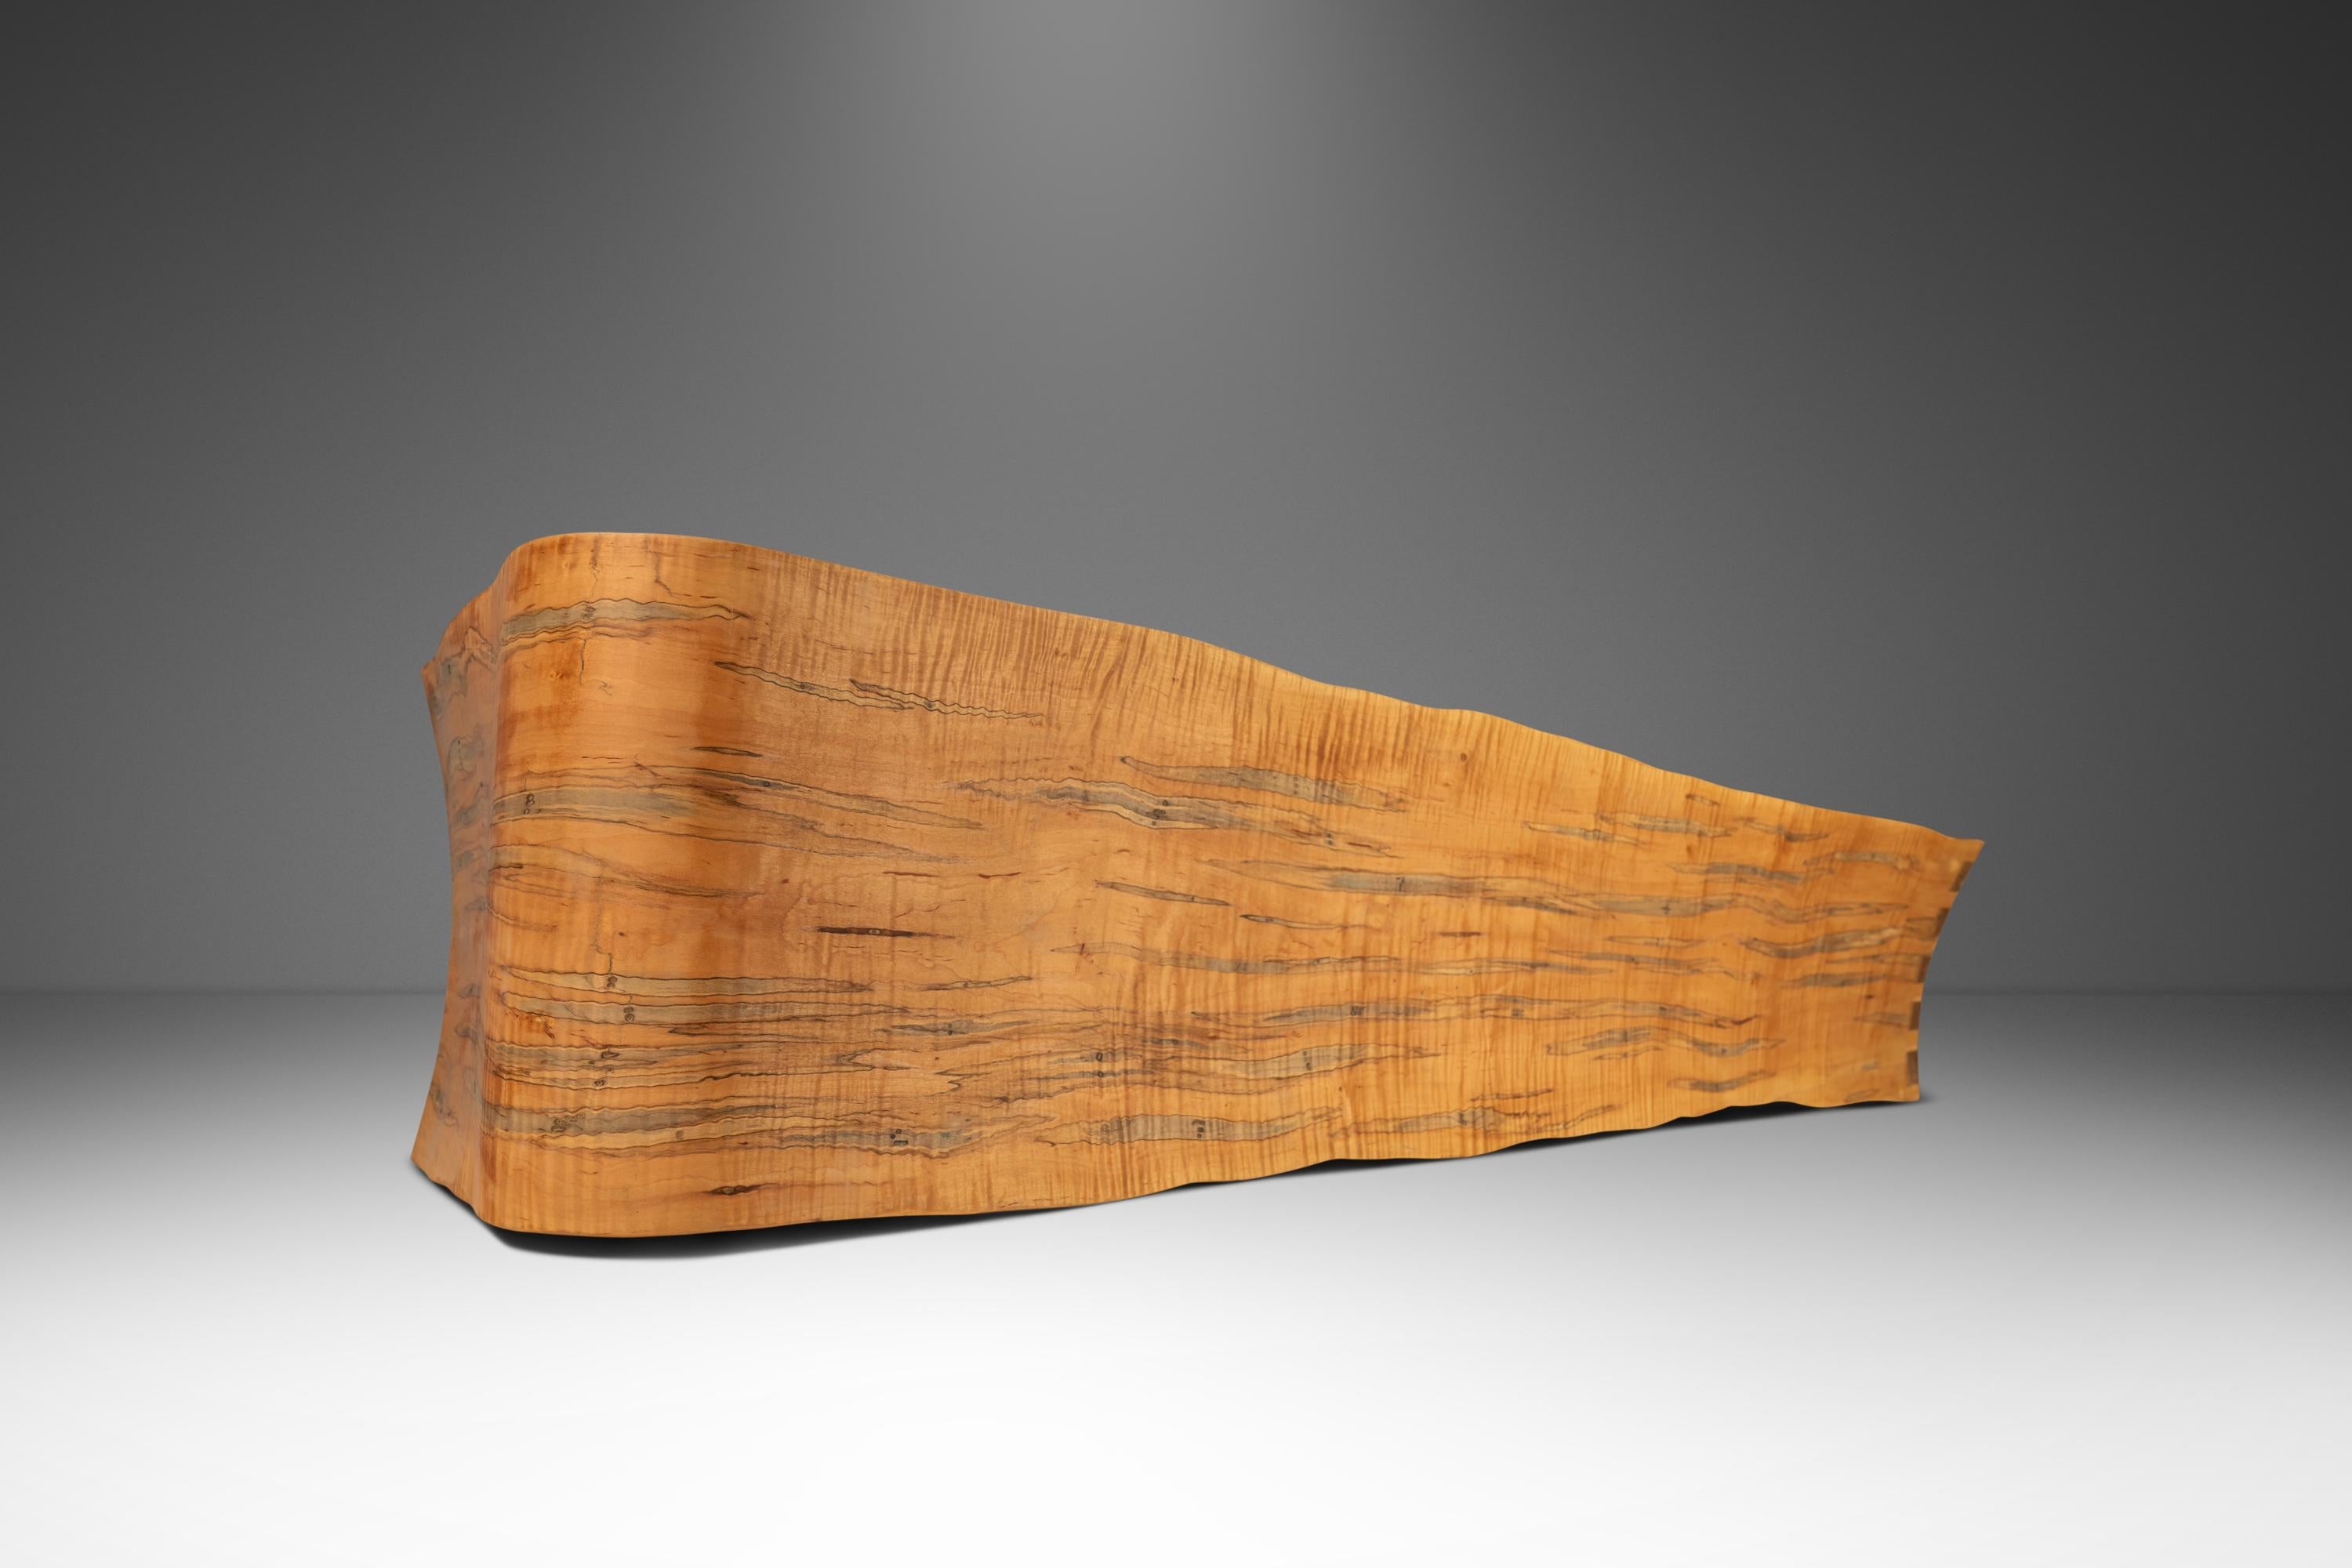 Bentwood Asymmetrical Abstract Three Seater Bench in Ambrosia Maple, Usa, 1980s For Sale 6